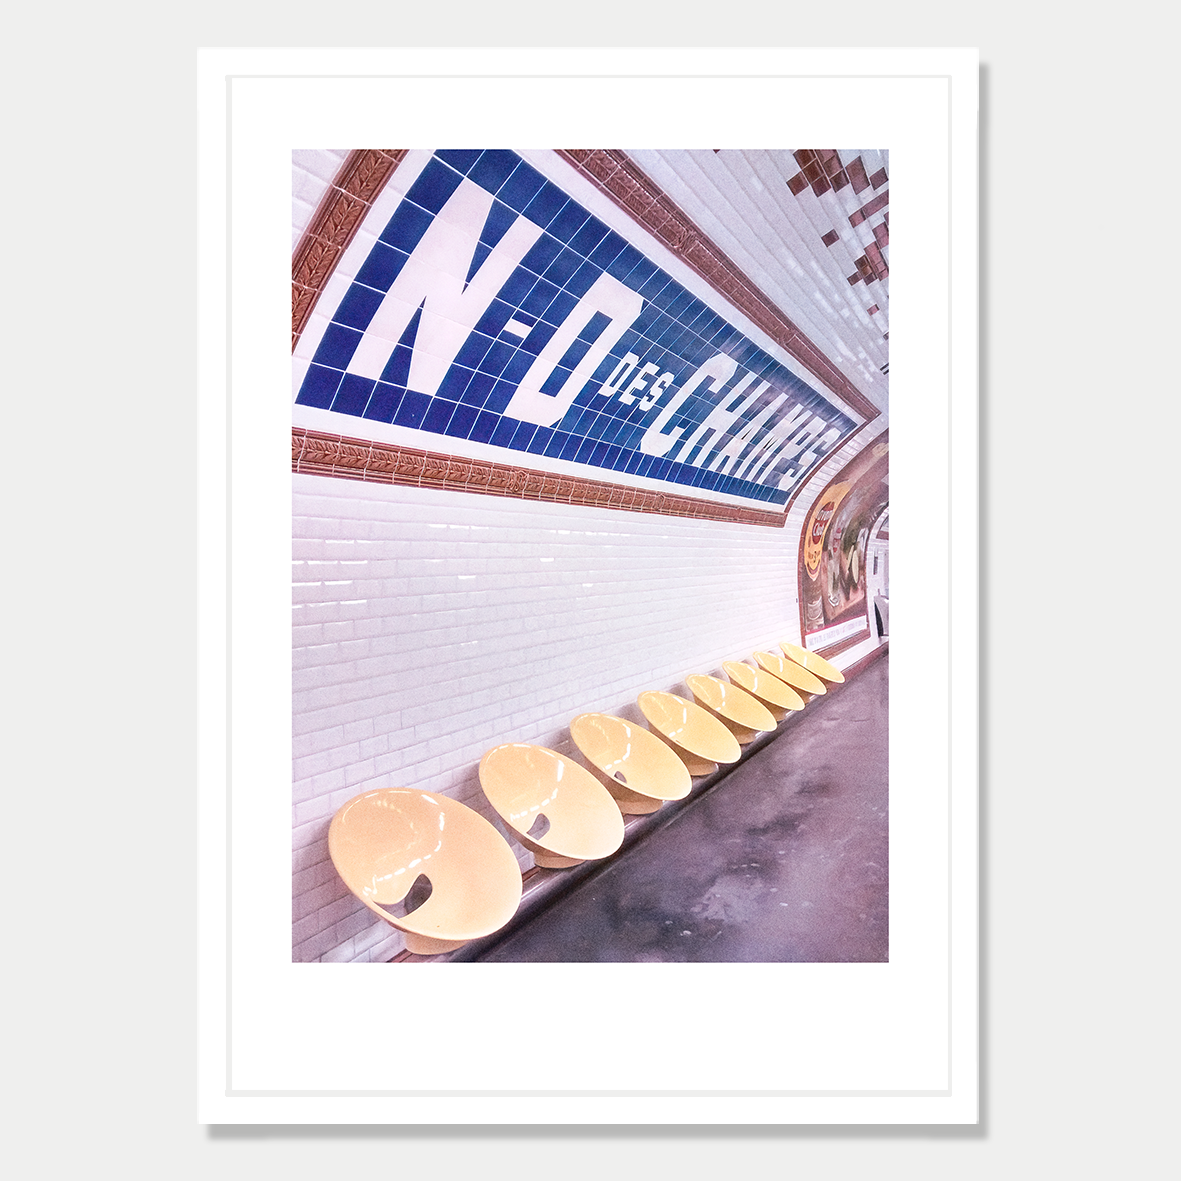 Nom Des Champs Subway Station in Paris, Still Life Photographic Art Print in a Skinny White Frame